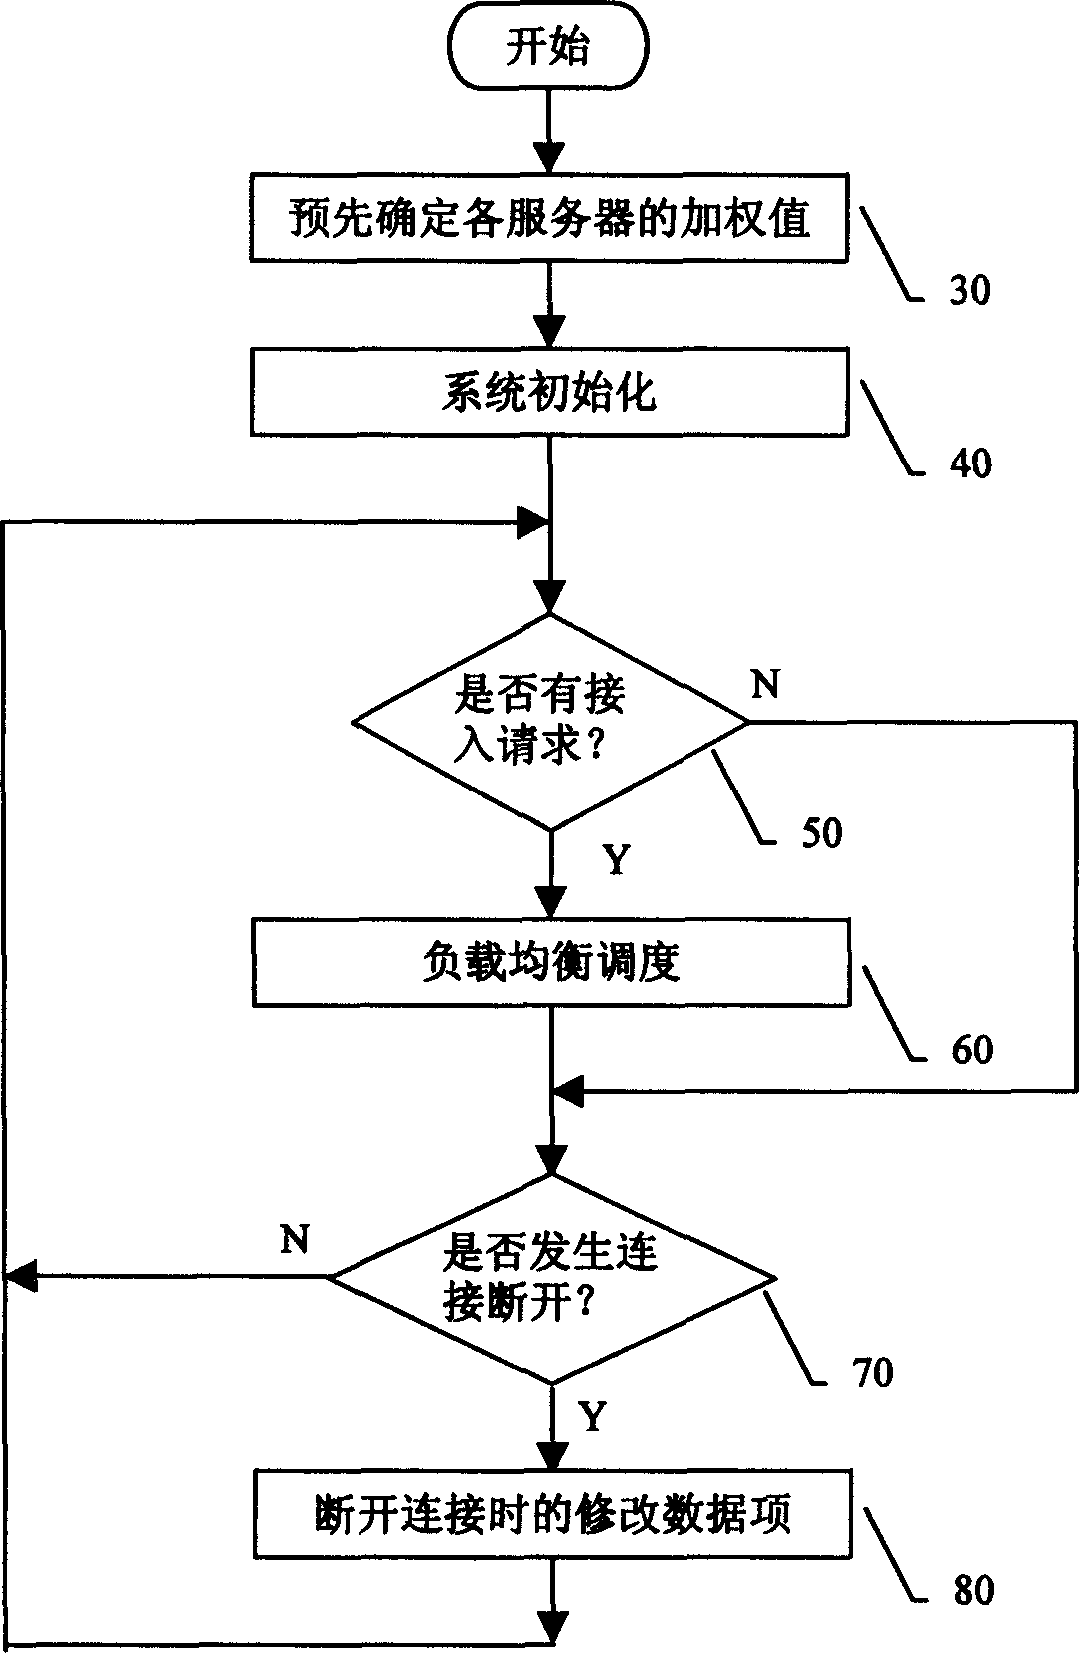 Server load equalization method for implementing weighted minimum linked allocation